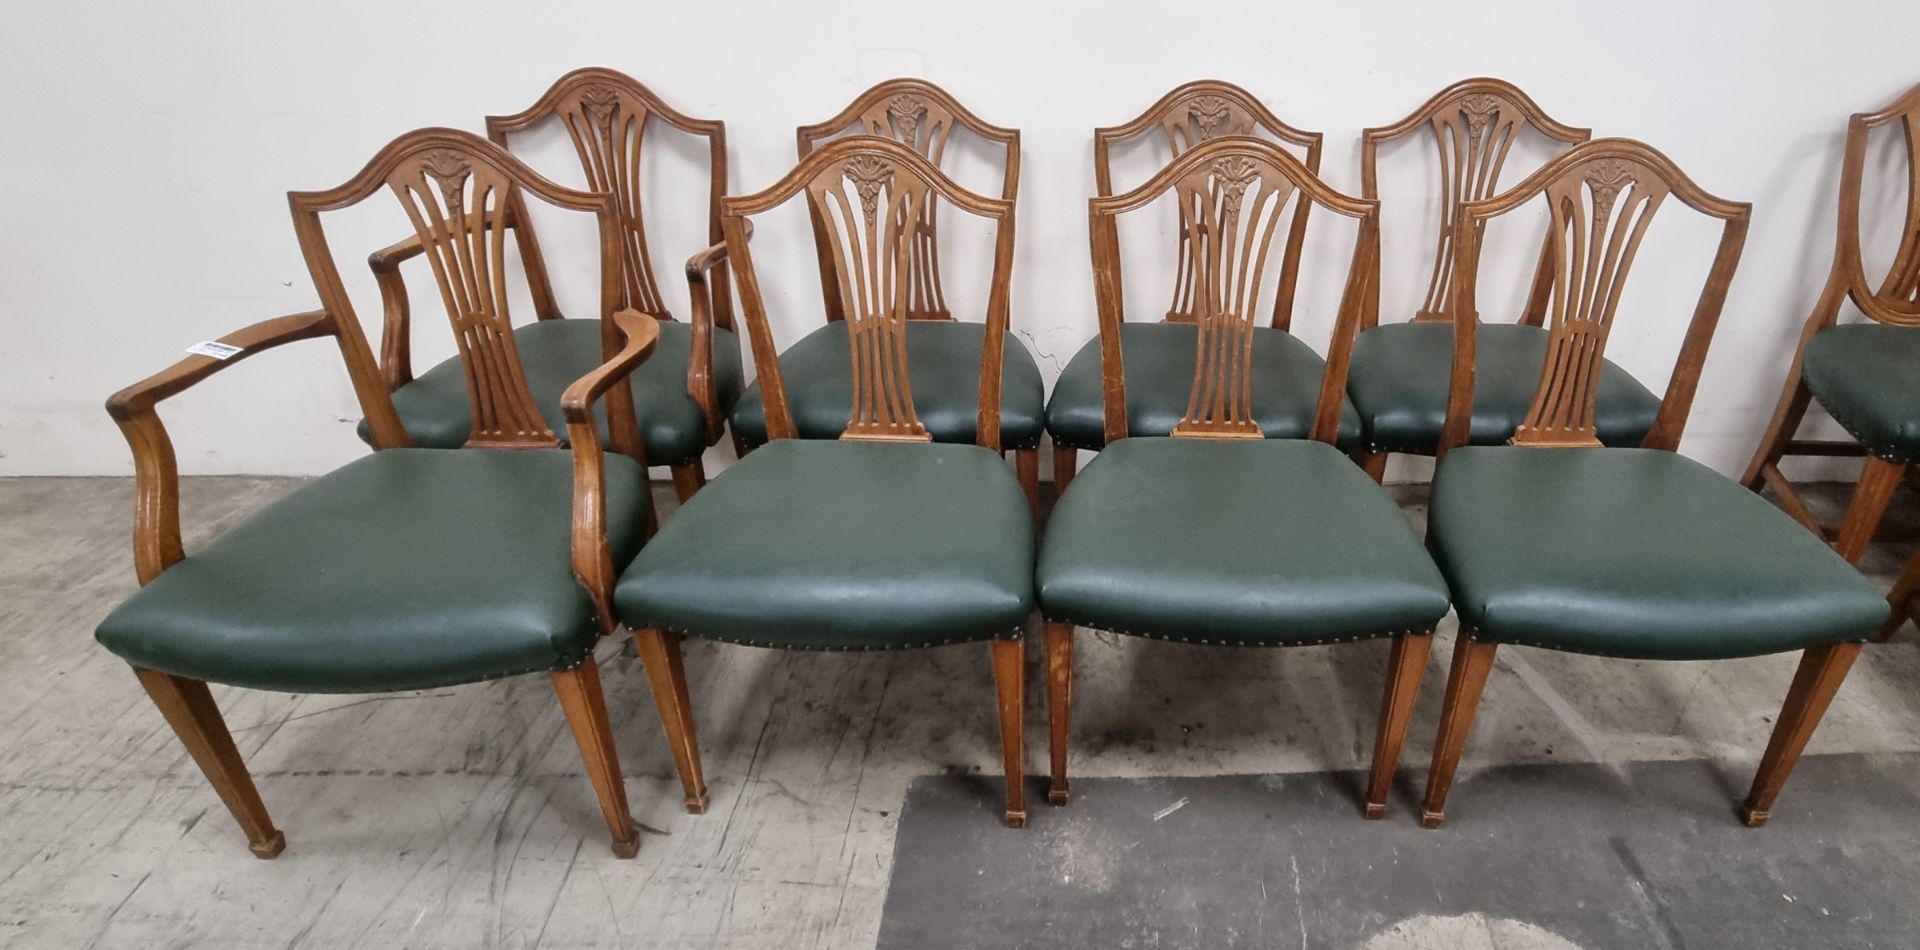 8x 1970 -1980's Wooden chairs